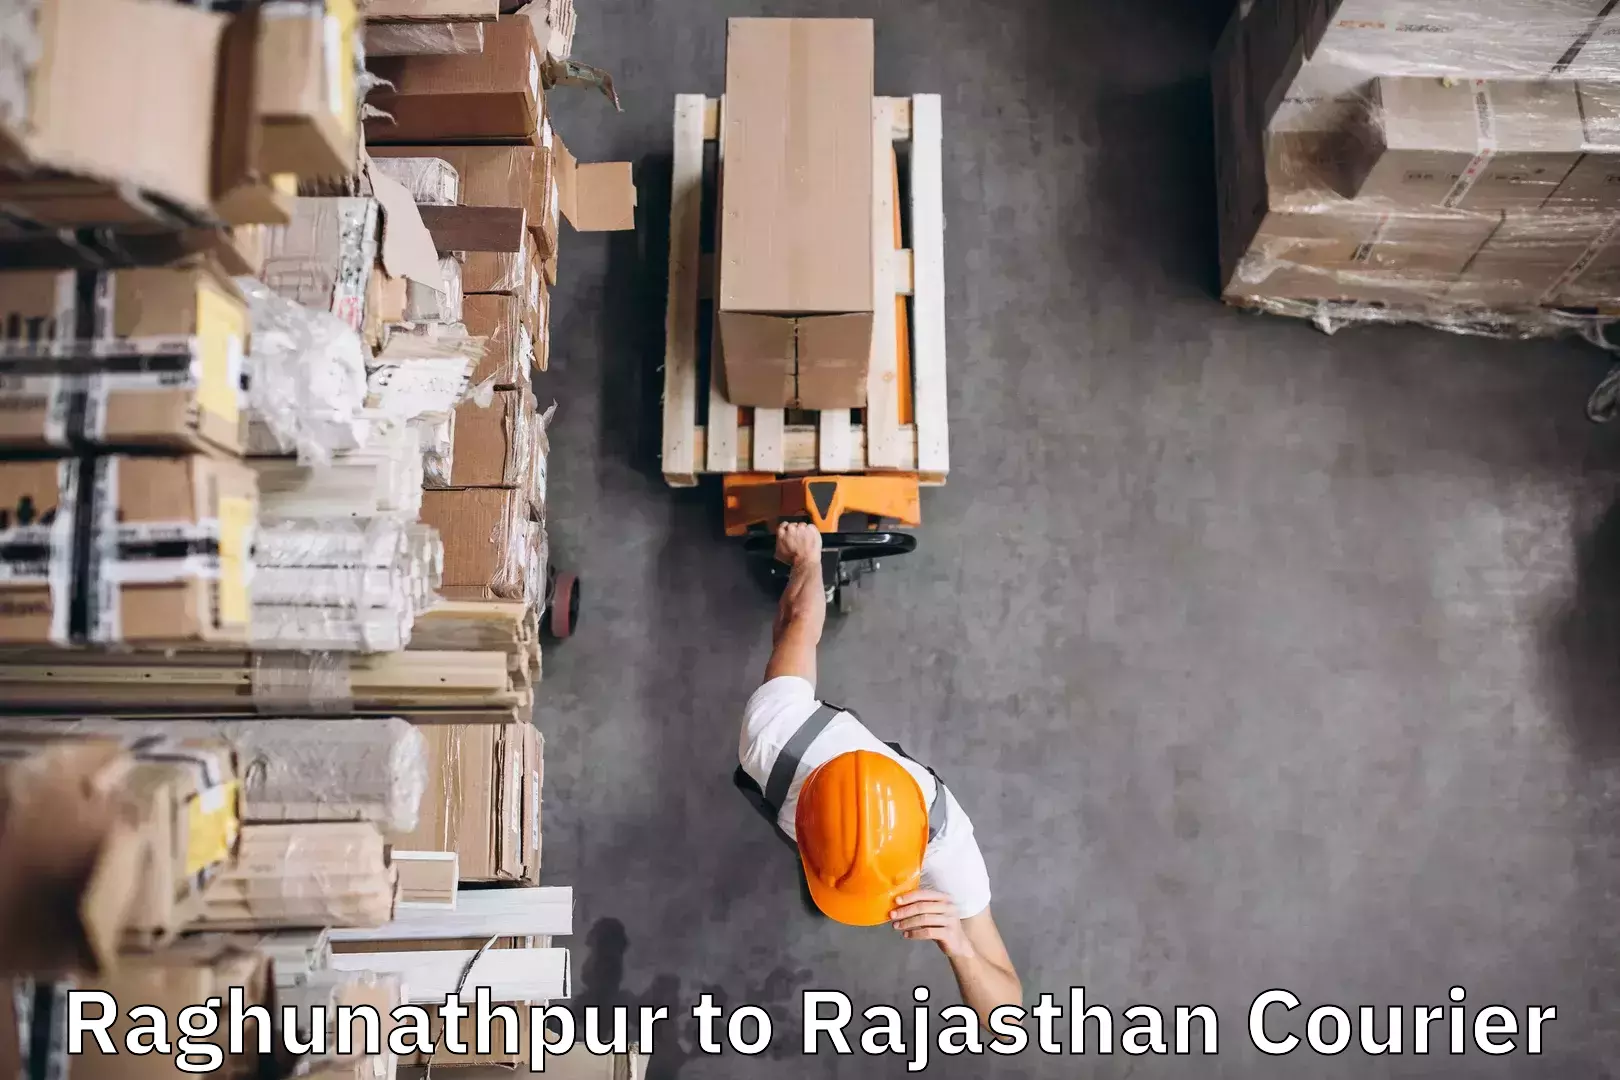 Luggage shipment specialists Raghunathpur to Yeswanthapur